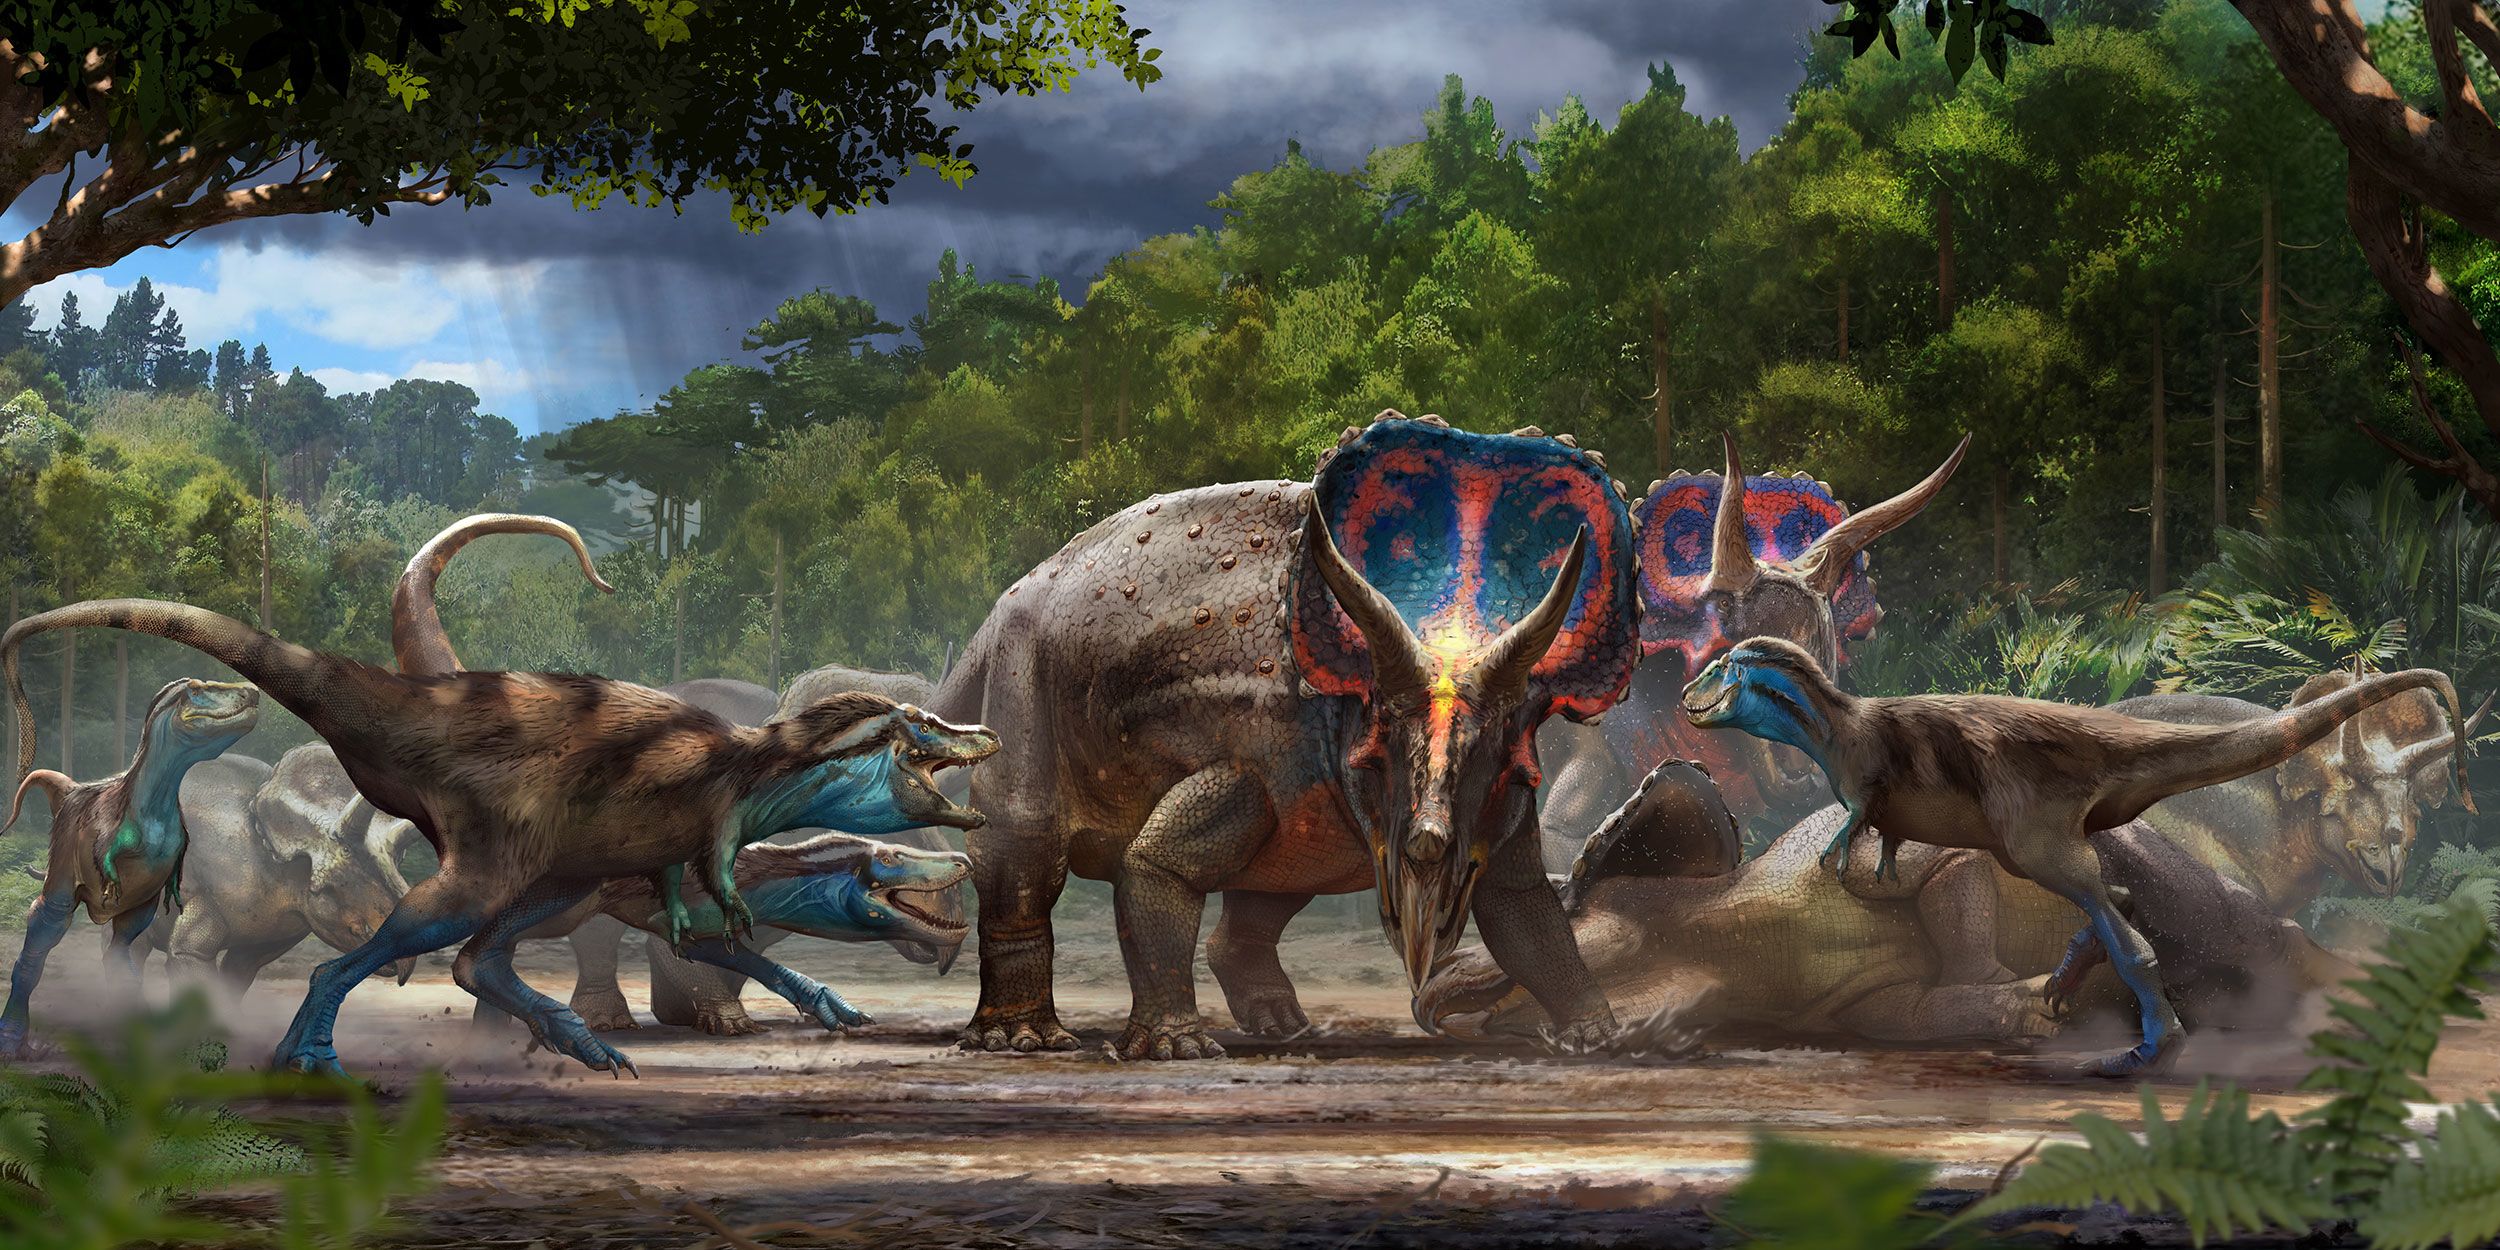 Dueling dinosaurs' fossils show Triceratops, T. rex, may have died after a  battle | CNN